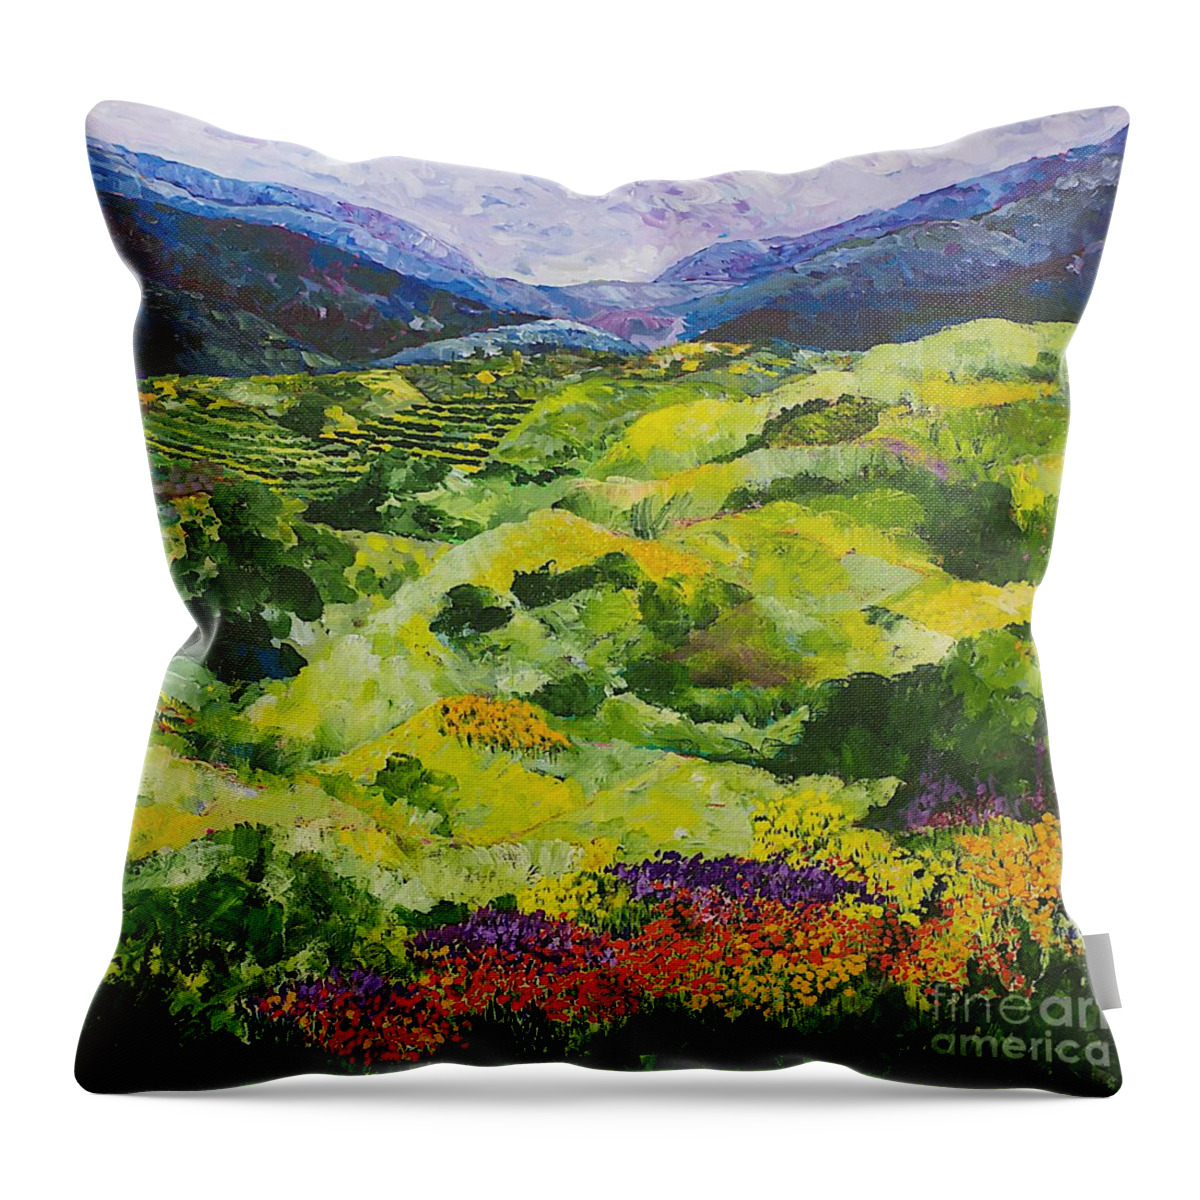 Landscape Throw Pillow featuring the painting Soft Grass by Allan P Friedlander